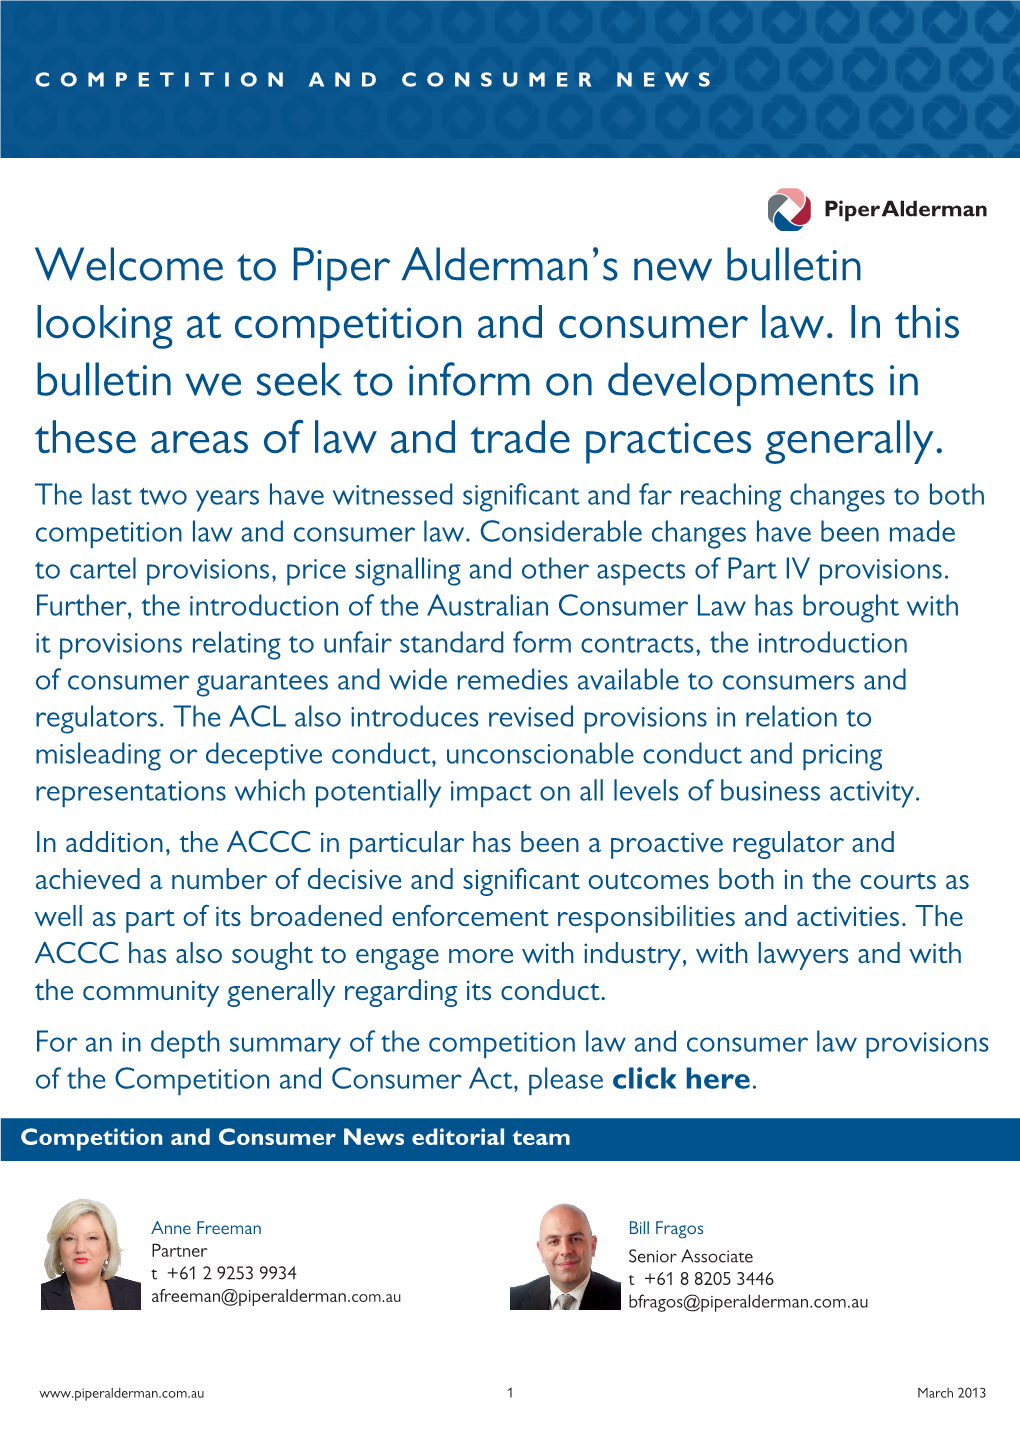 Welcome to Piper Alderman's New Bulletin Looking at Competition and Consumer Law. in This Bulletin We Seek to Inform on Develo